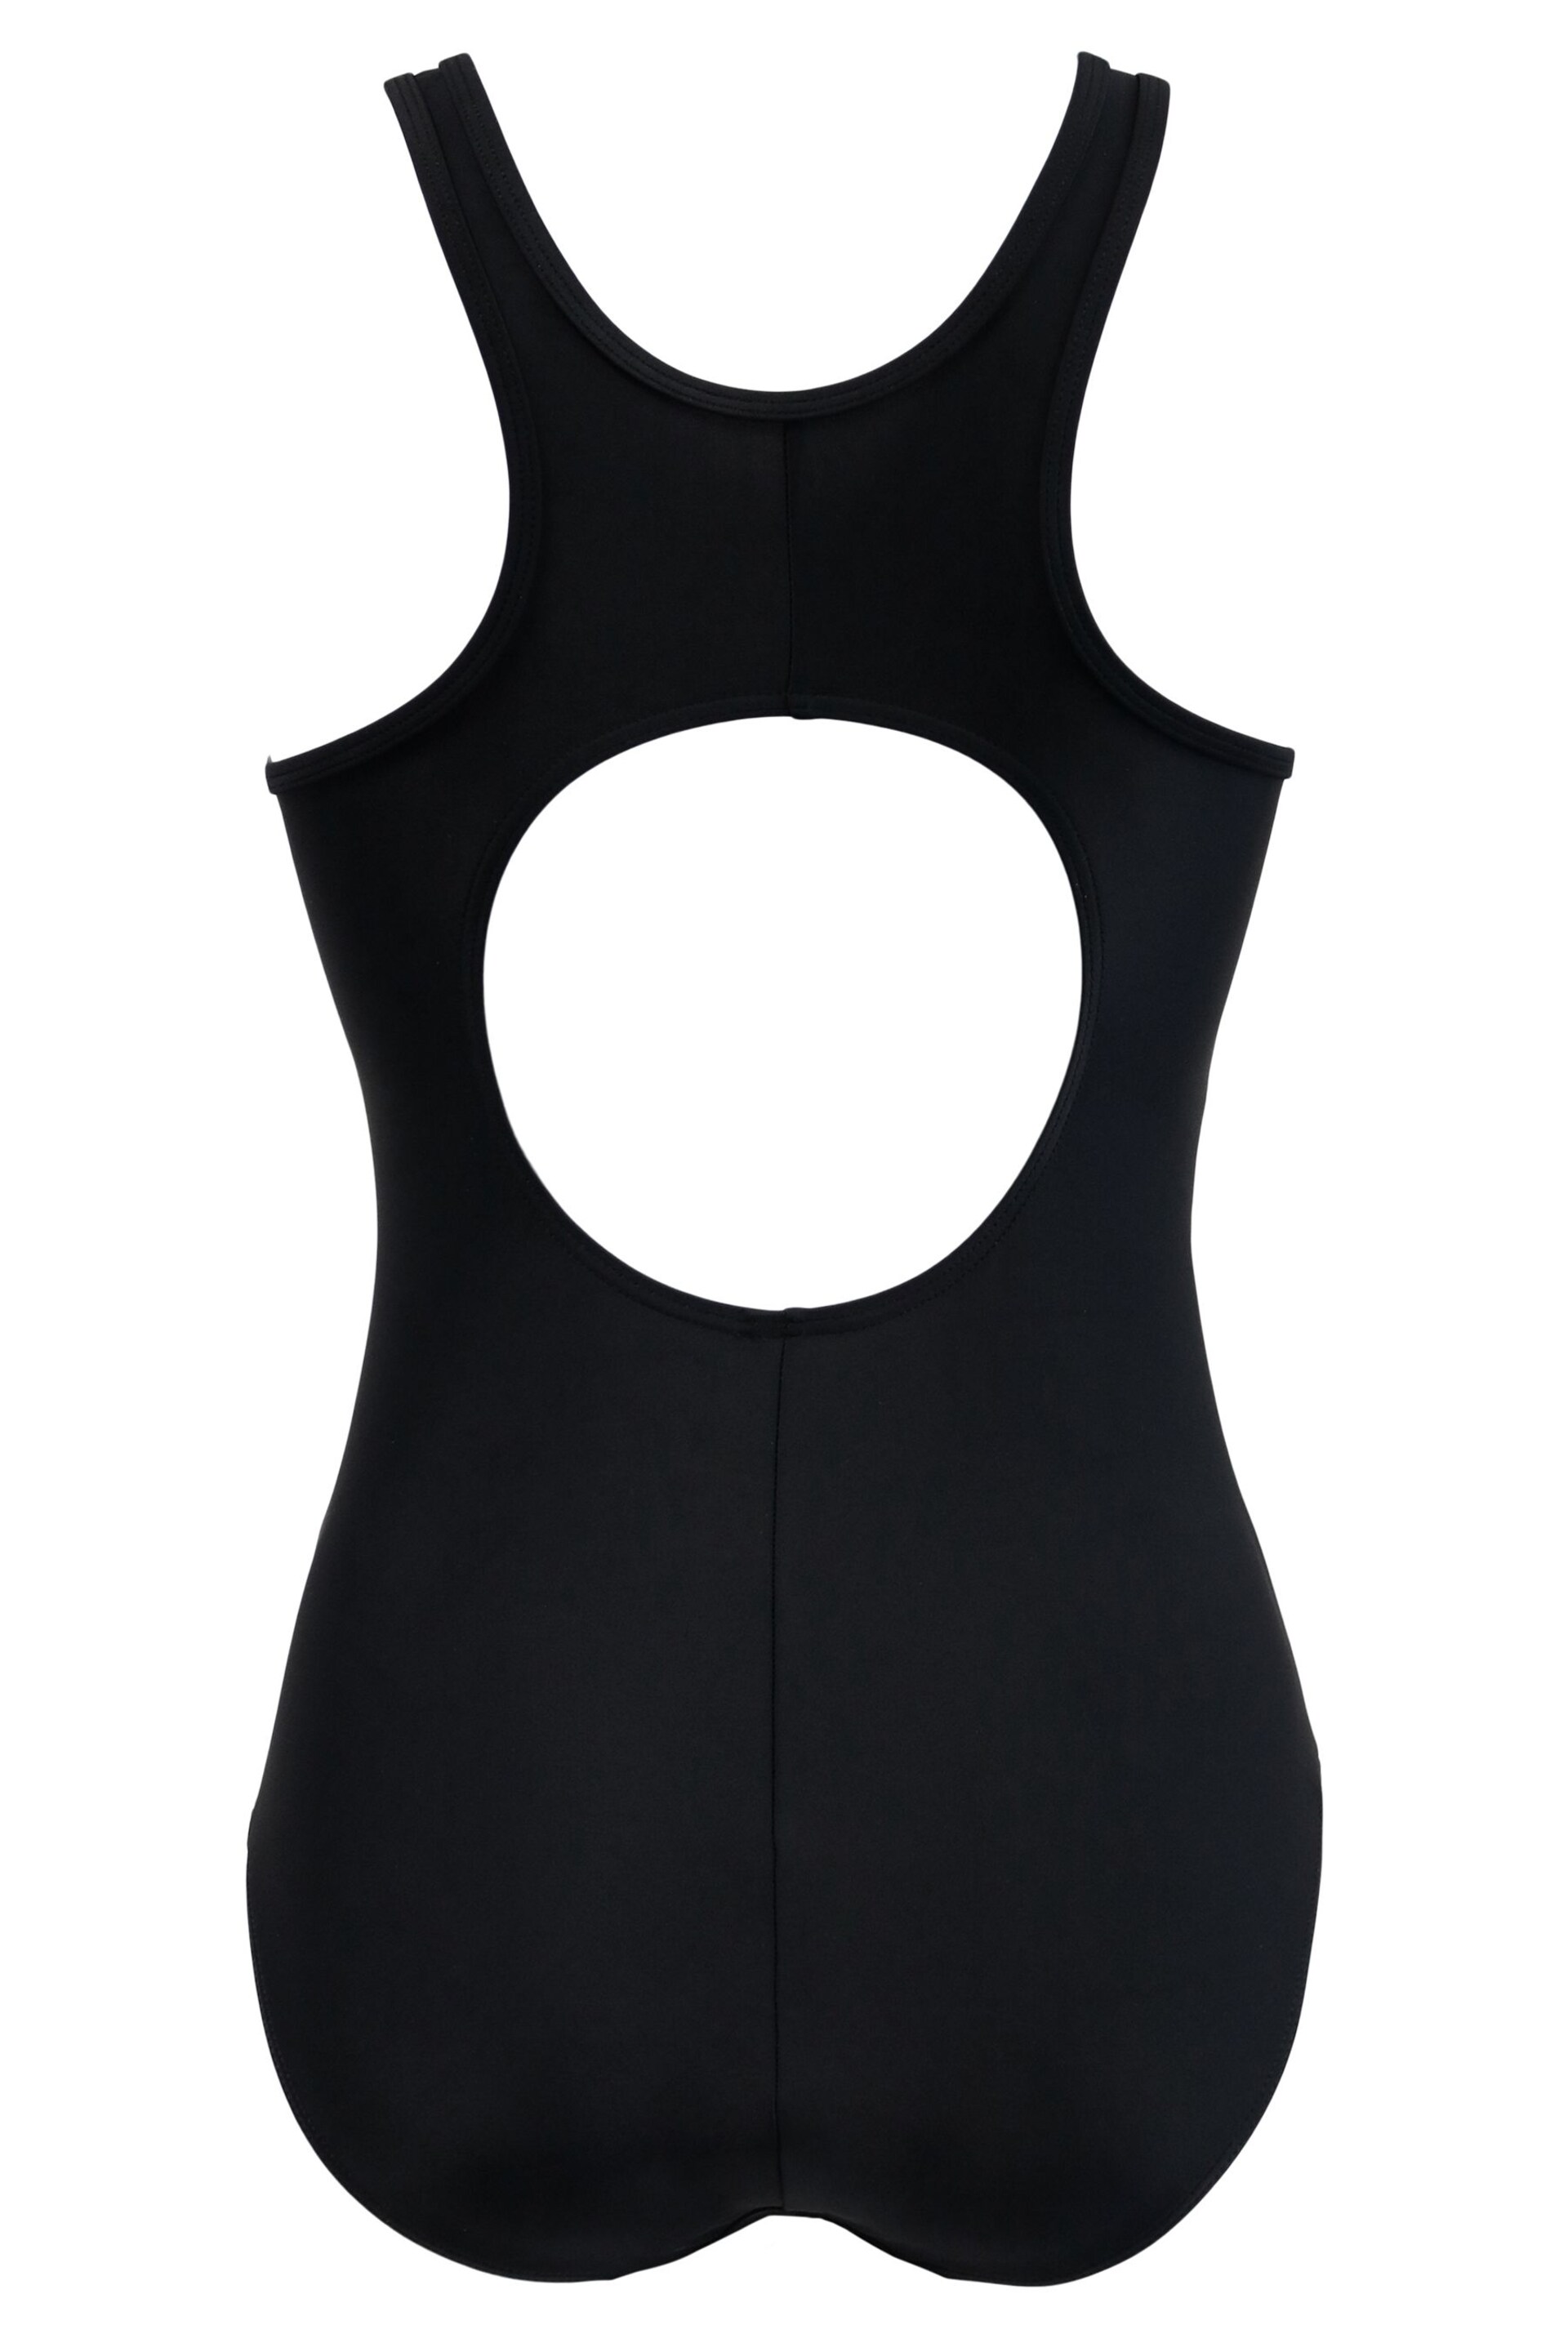 Pour Moi Black Energy Chlorine Resistant High Neck Zip Front Swimsuit - Image 5 of 5